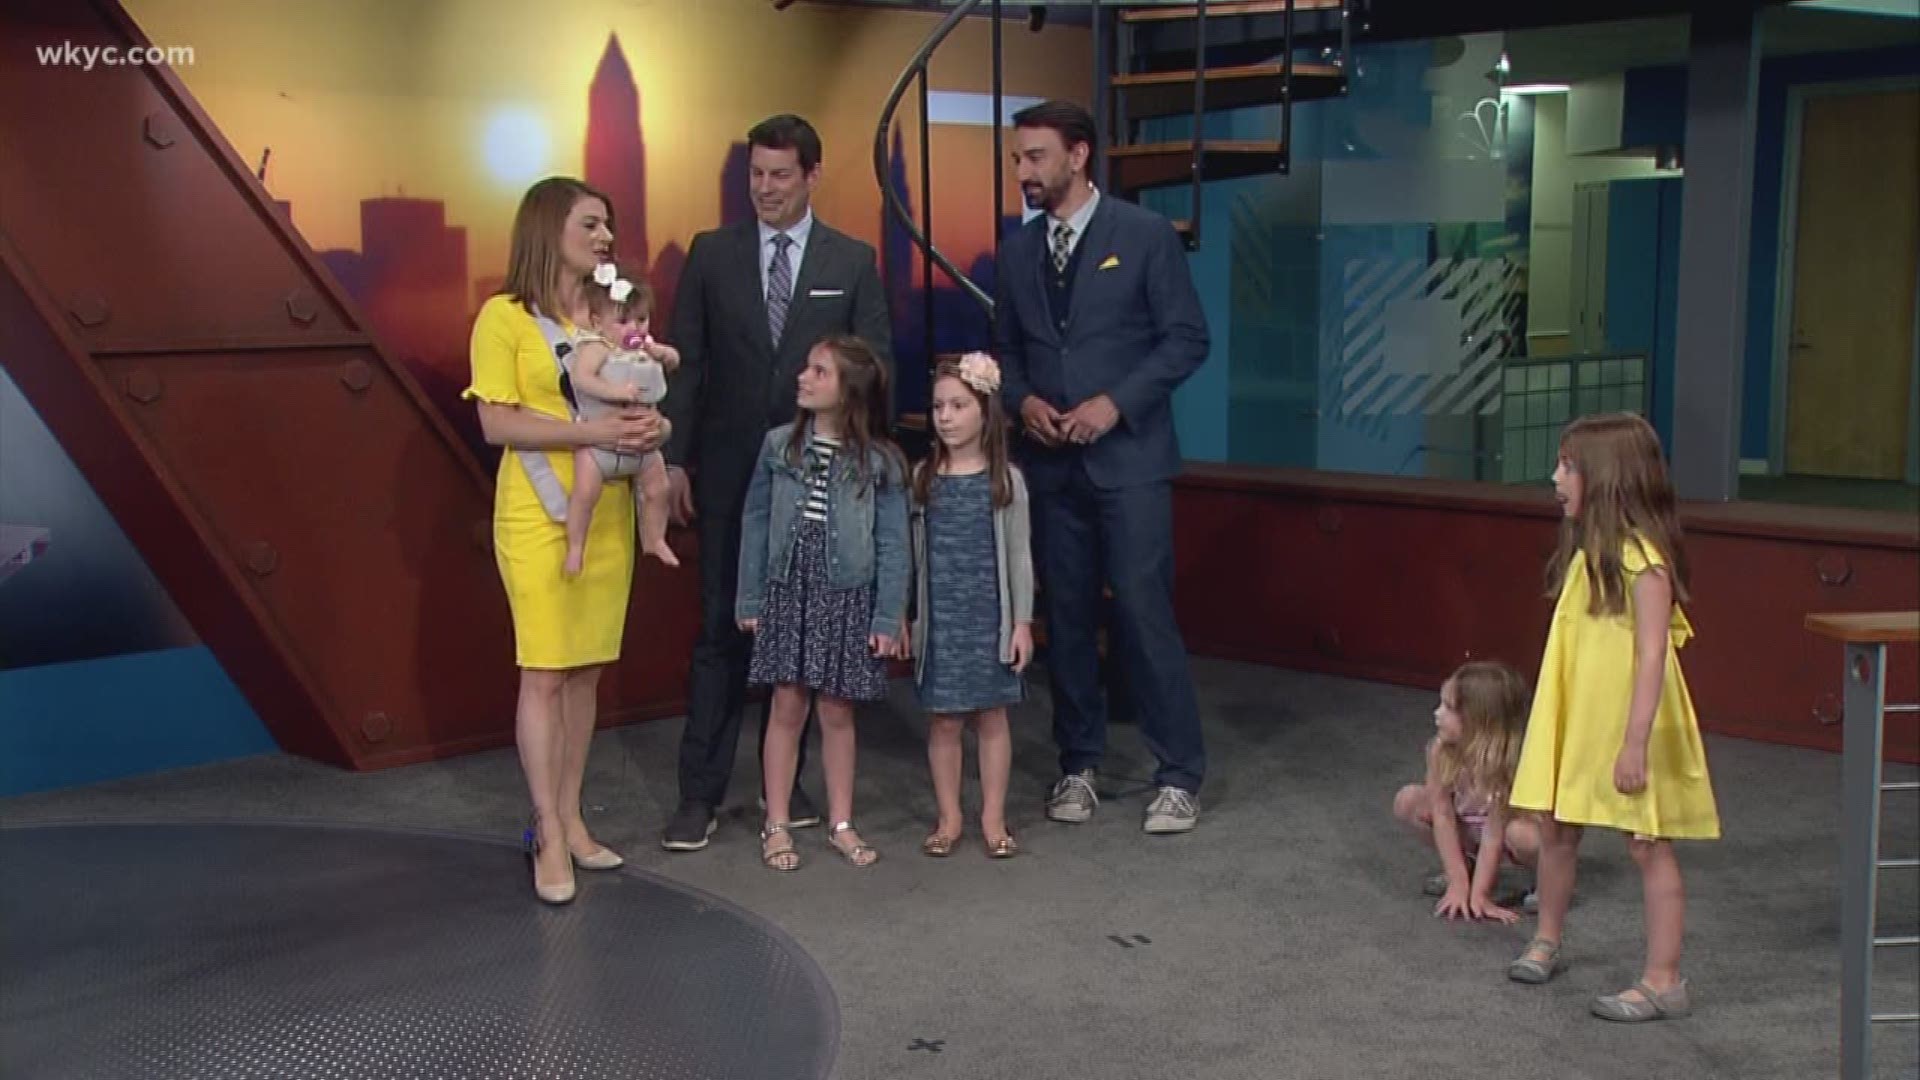 April 25, 2019: It's Take Your Child To Work Day, and we celebrated by having Dave Chudowsky and Maureen Kyle bring their own children to join us on live TV.